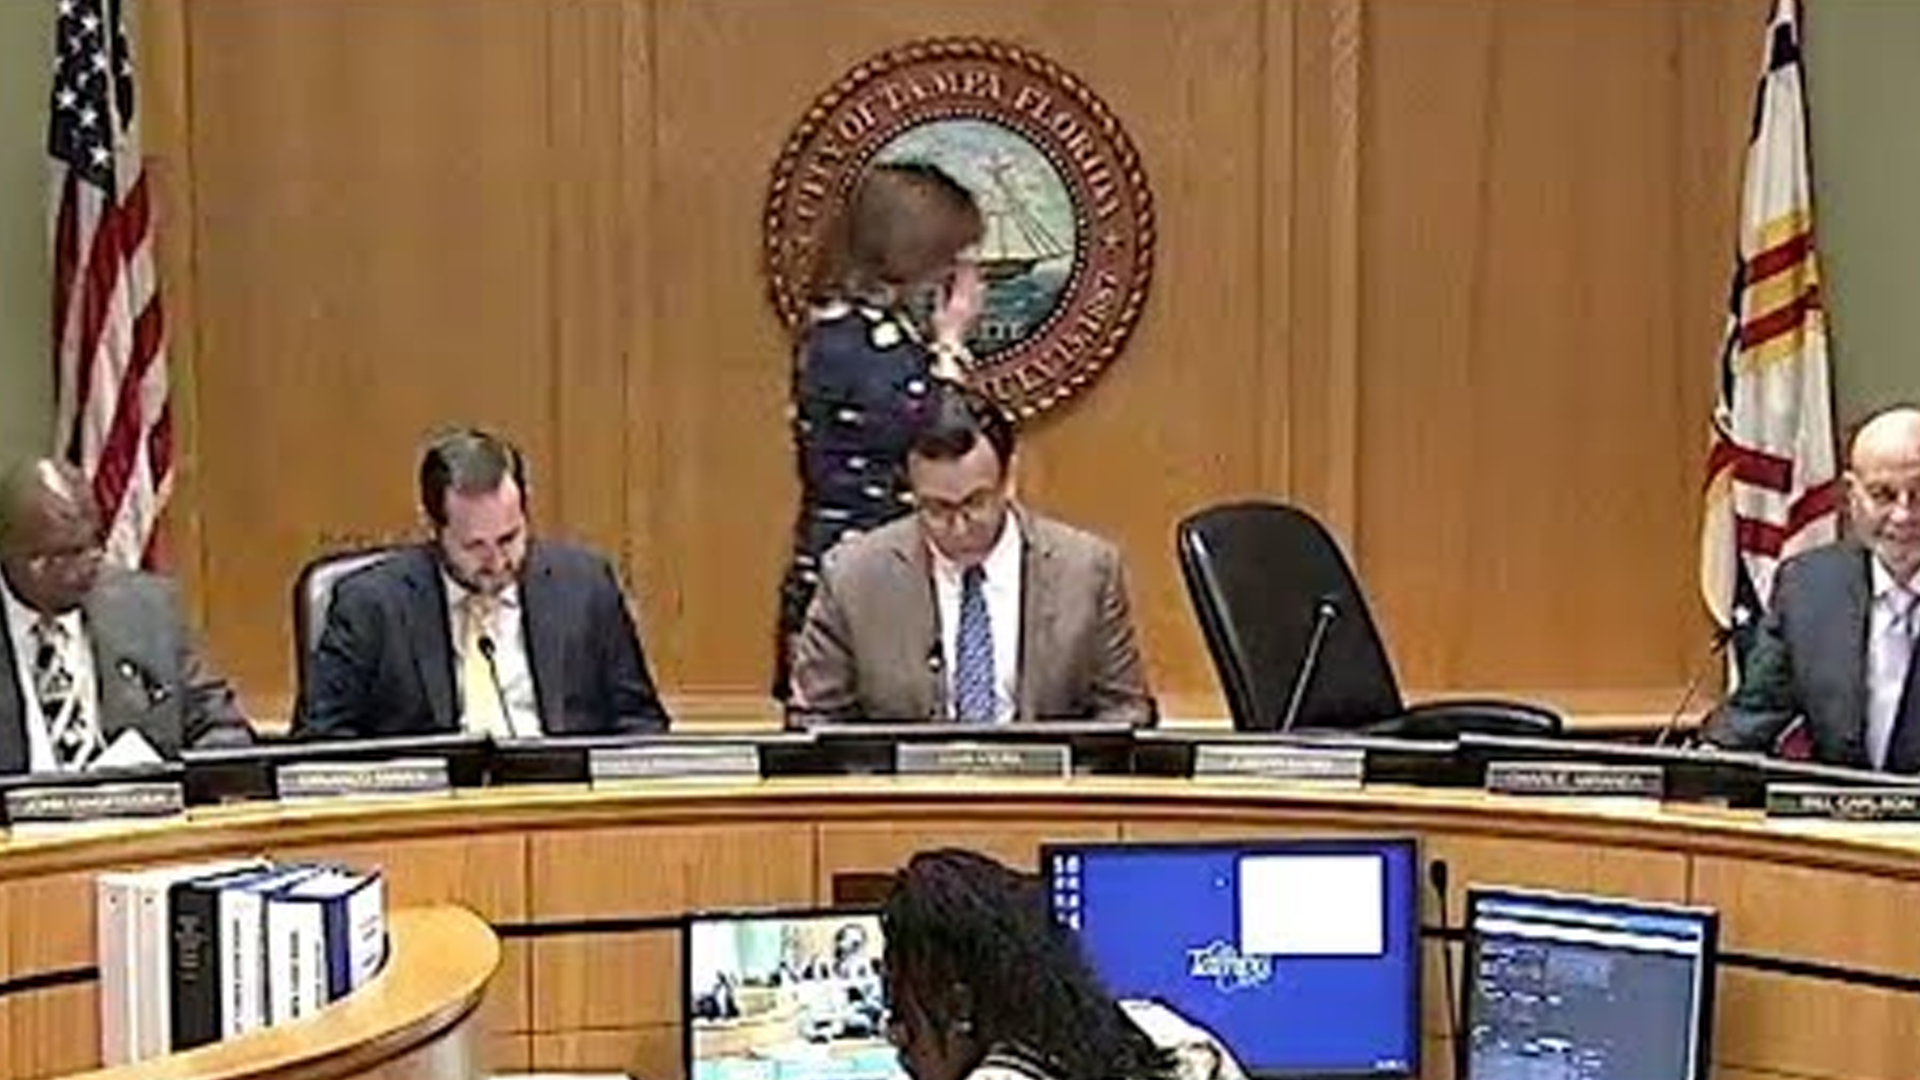 Tampa City Council Aide Resigns After Video of Her 'Cough' Goes Viral - Thumbnail Image